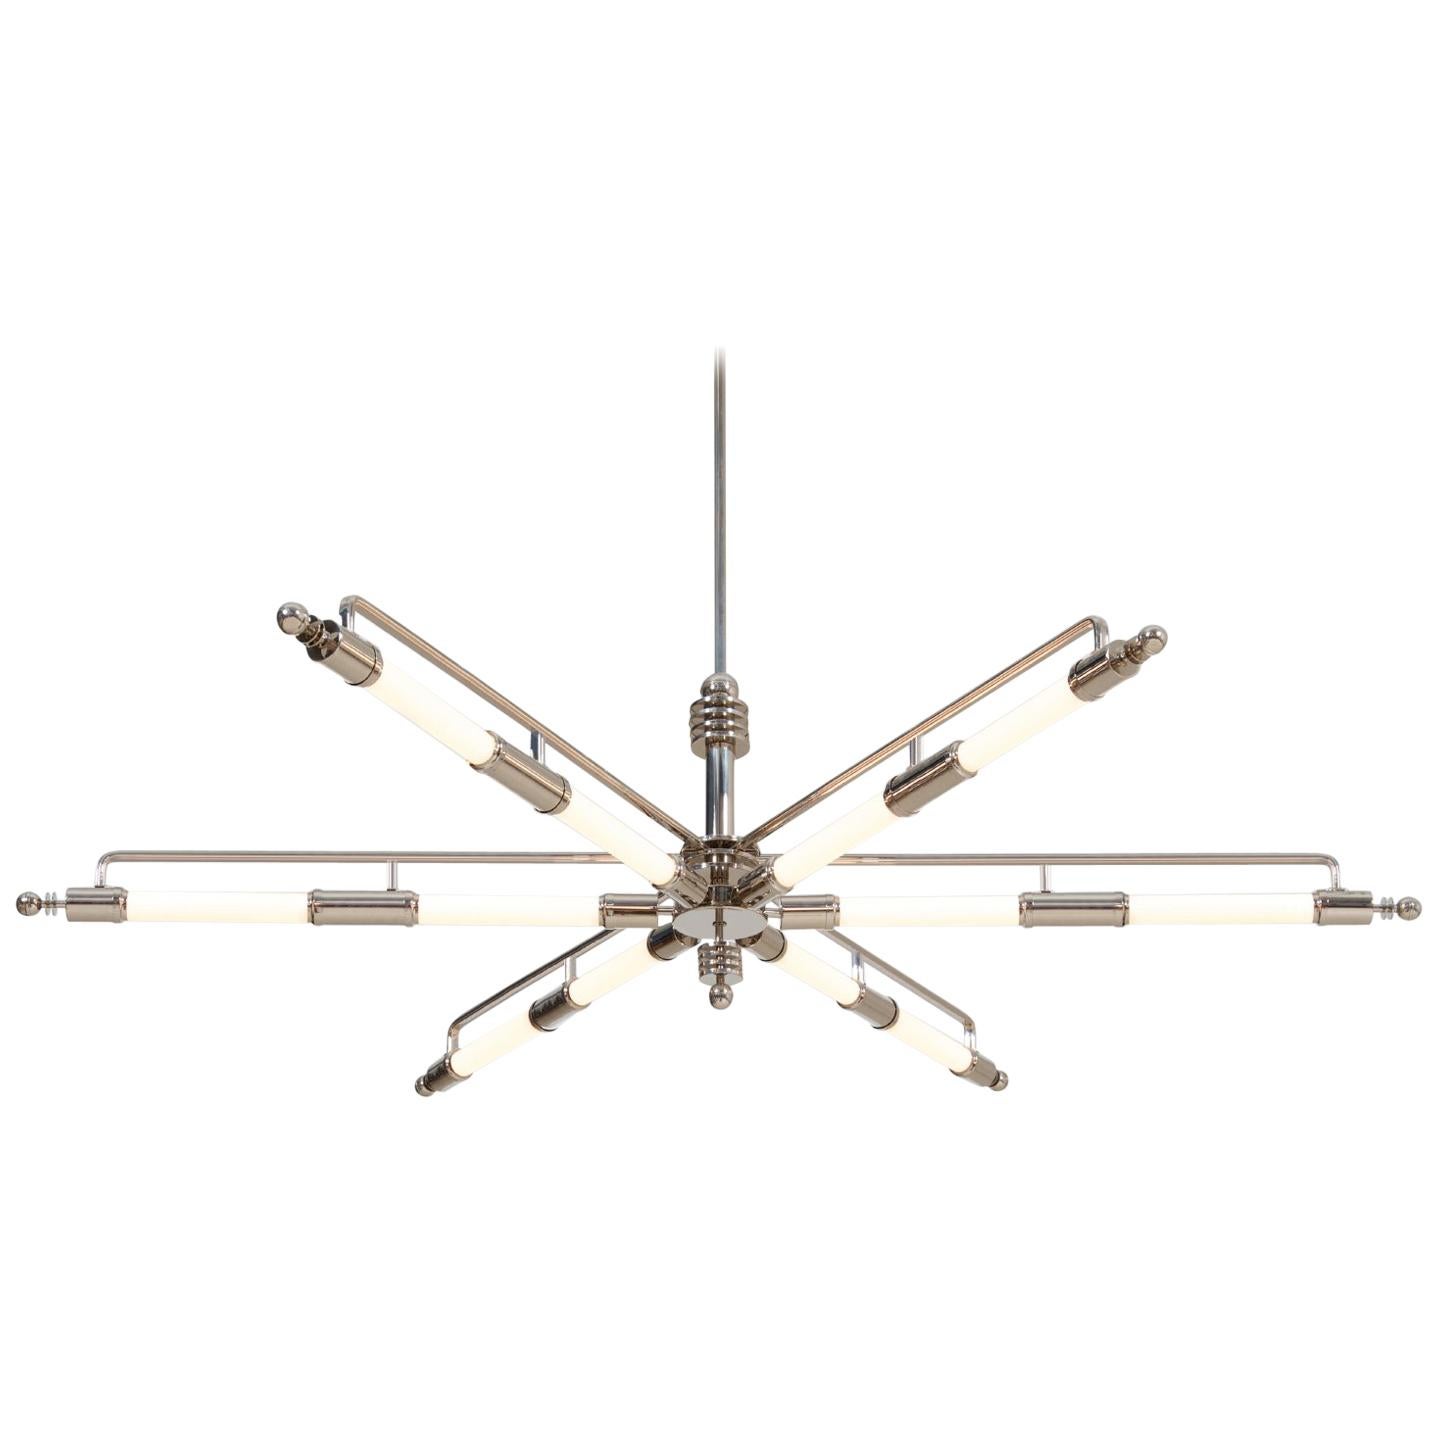 Large Machine Age Chandelier with 6 Arms, Nickel-Plated Brass, Customizable